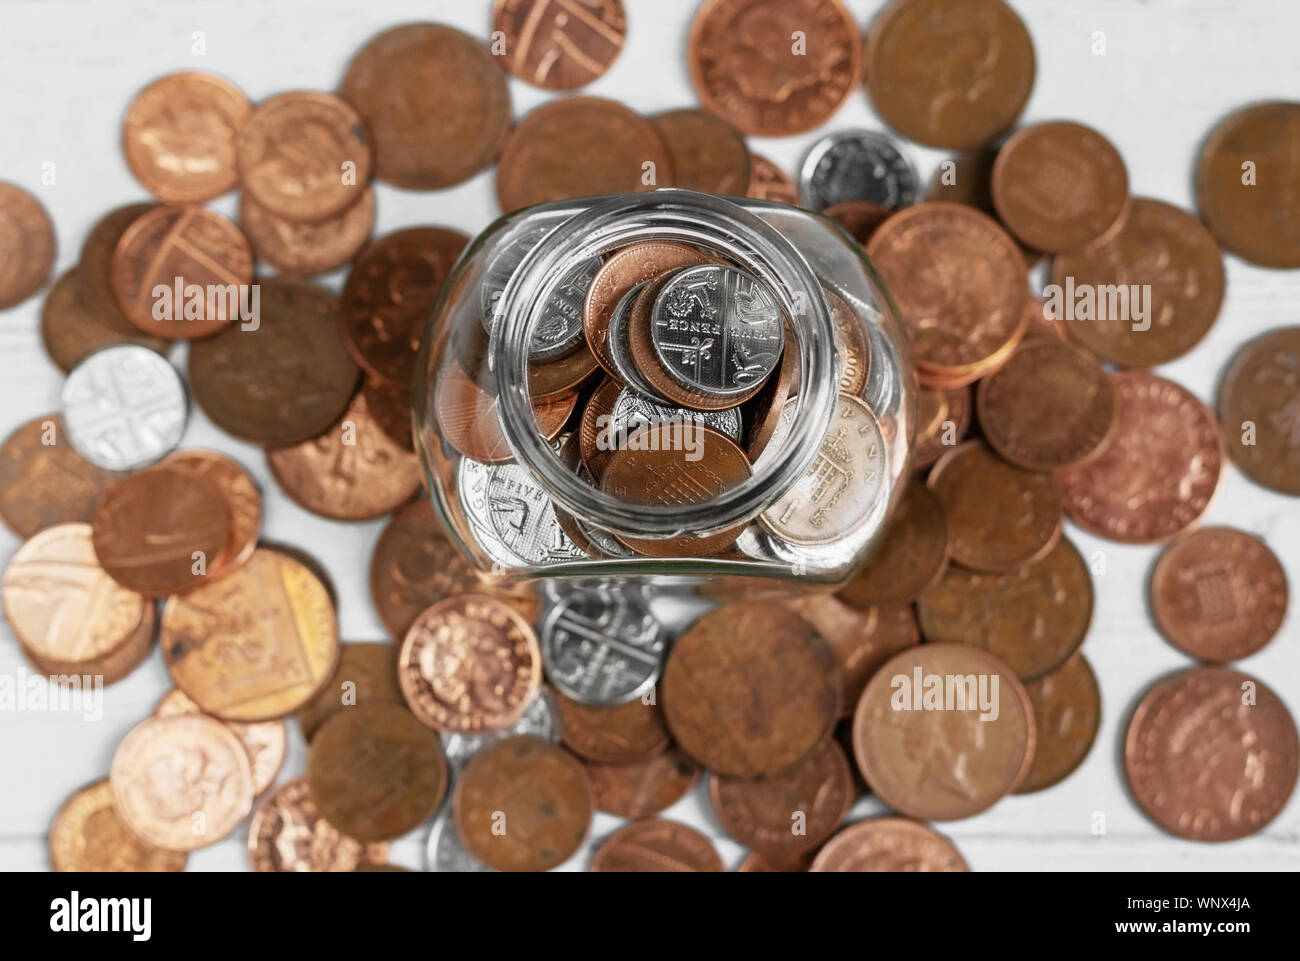 Full jar of coins from above, surrounded by loose change. Money saving and investment concept Stock Photo